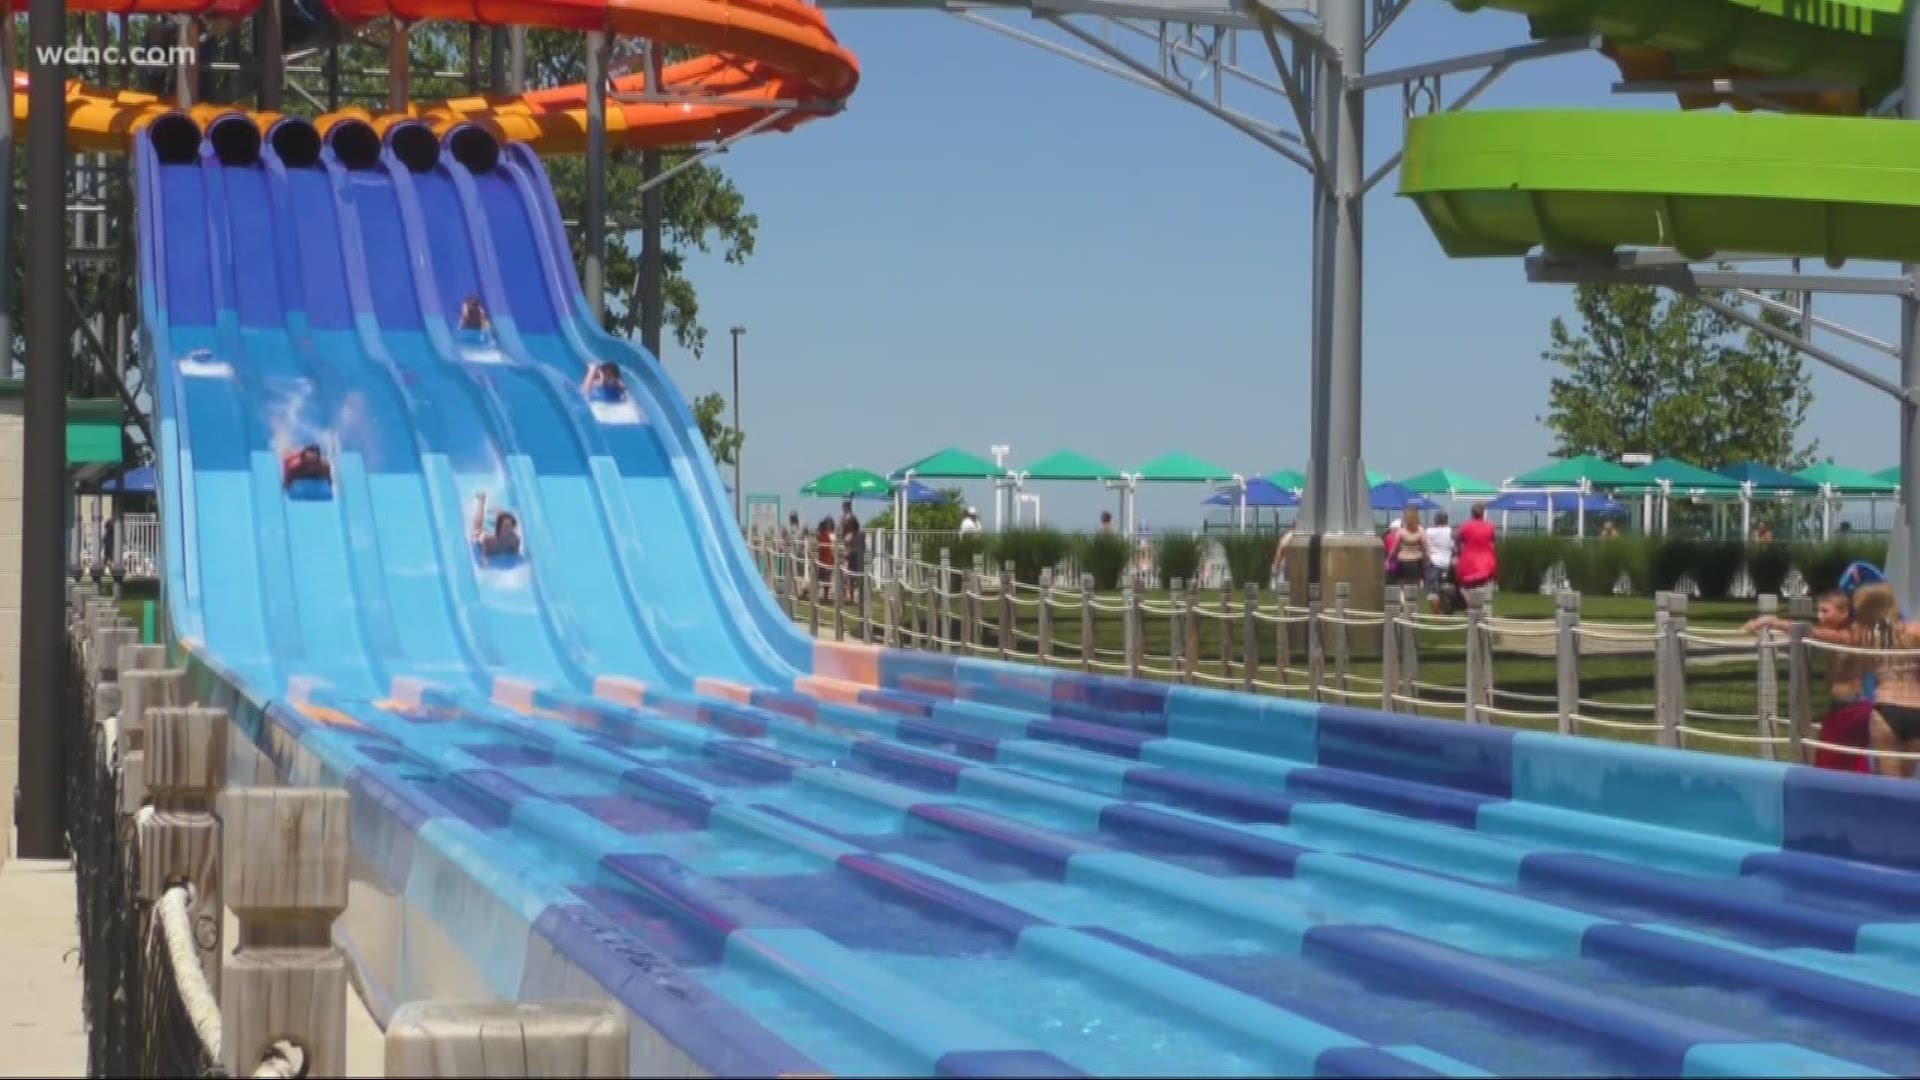 Boogie Board Racer Coming To Carowinds In 2020 Wcnc Com - speed booster slides roblox water park world 13